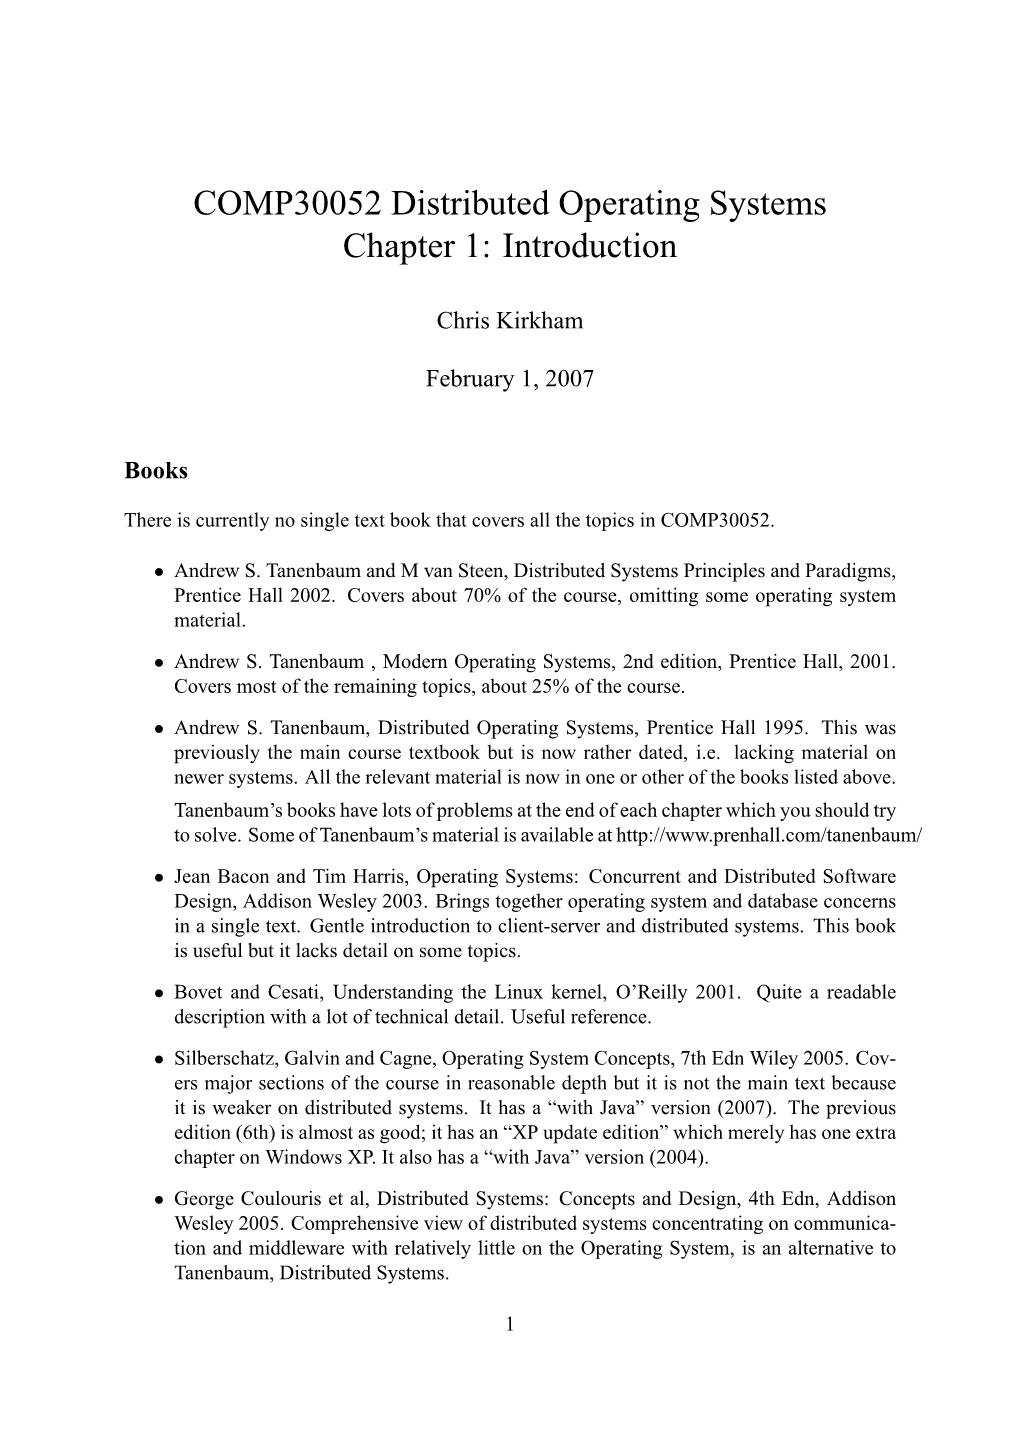 COMP30052 Distributed Operating Systems Chapter 1: Introduction